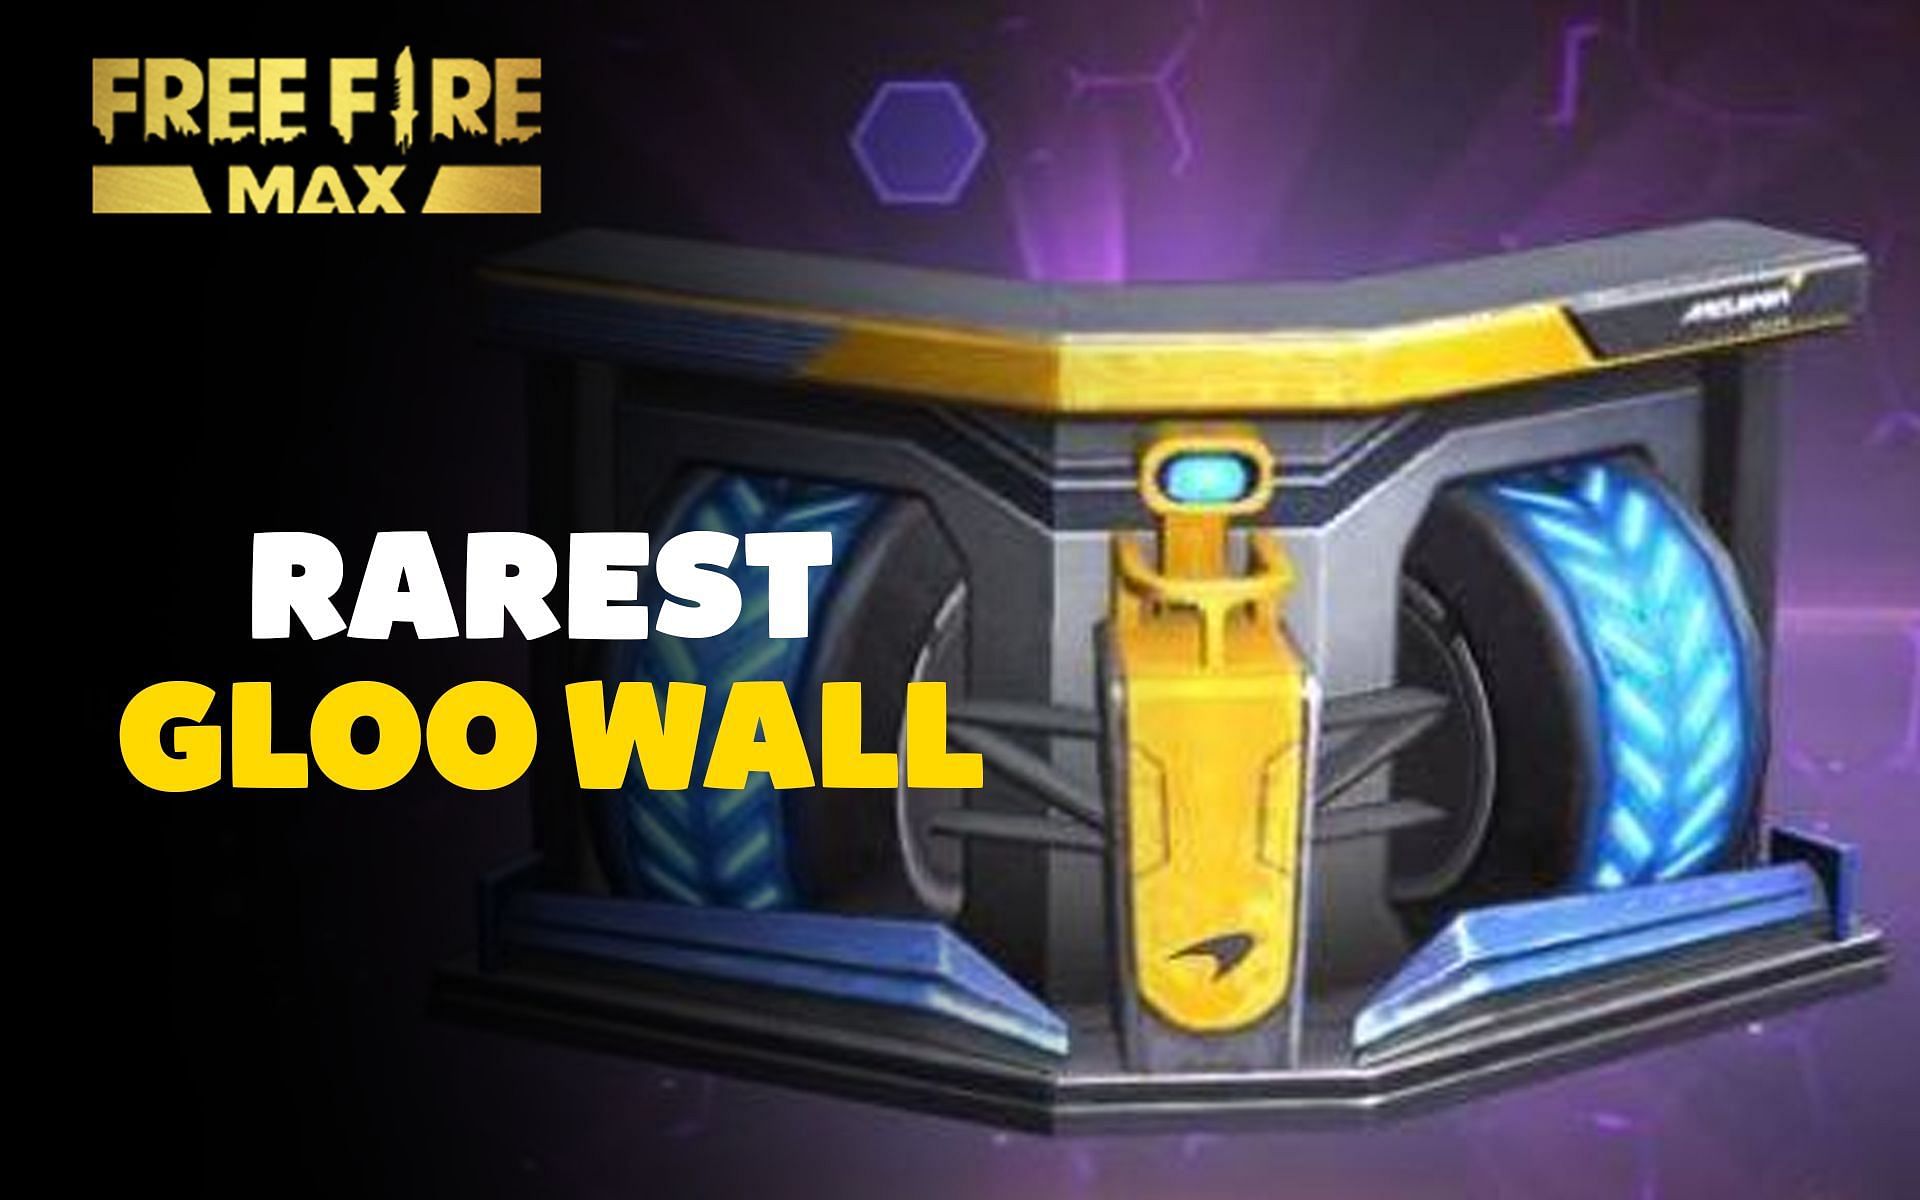 Gloo wall skins come in all shapes and sizes in Free Fire MAX (Image via Sportskeeda)